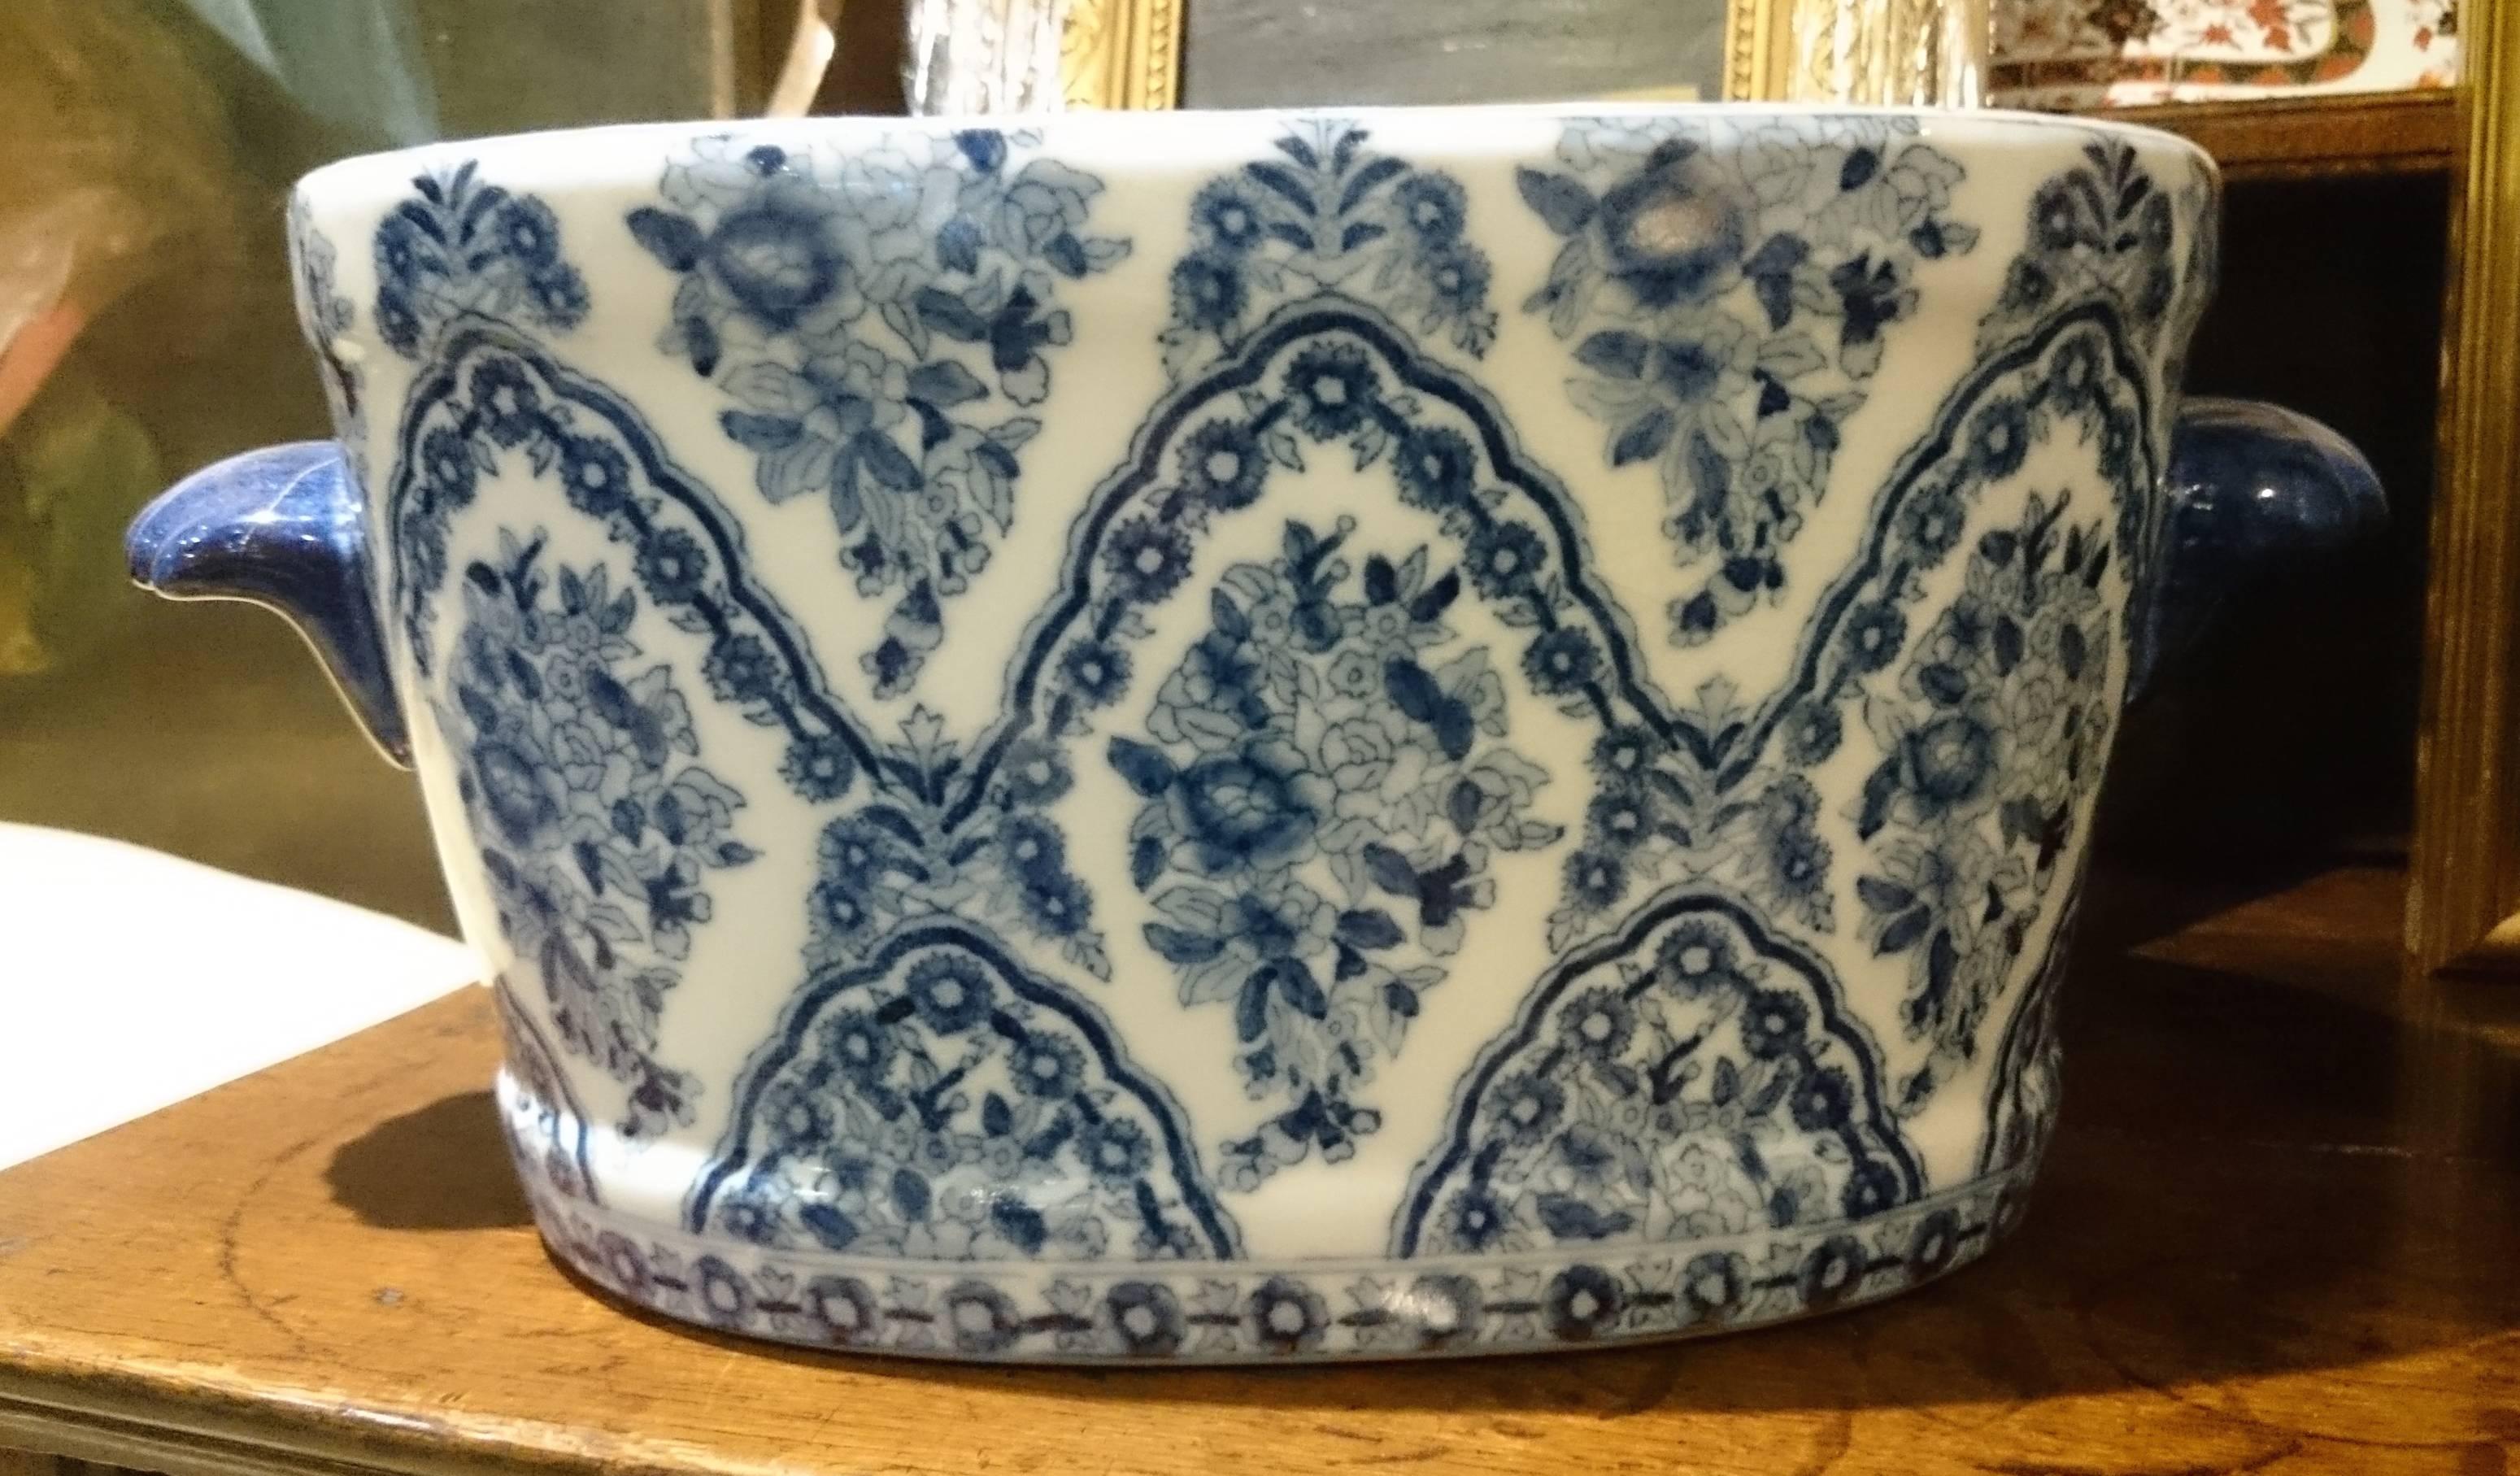 Good size early 19th century Chinese export porcelain punch bowl or wash bowl. This bowl is of course handmade, interestingly it has transfer printed exterior design with hand painted interior decoration with fun images of fish and other underwater